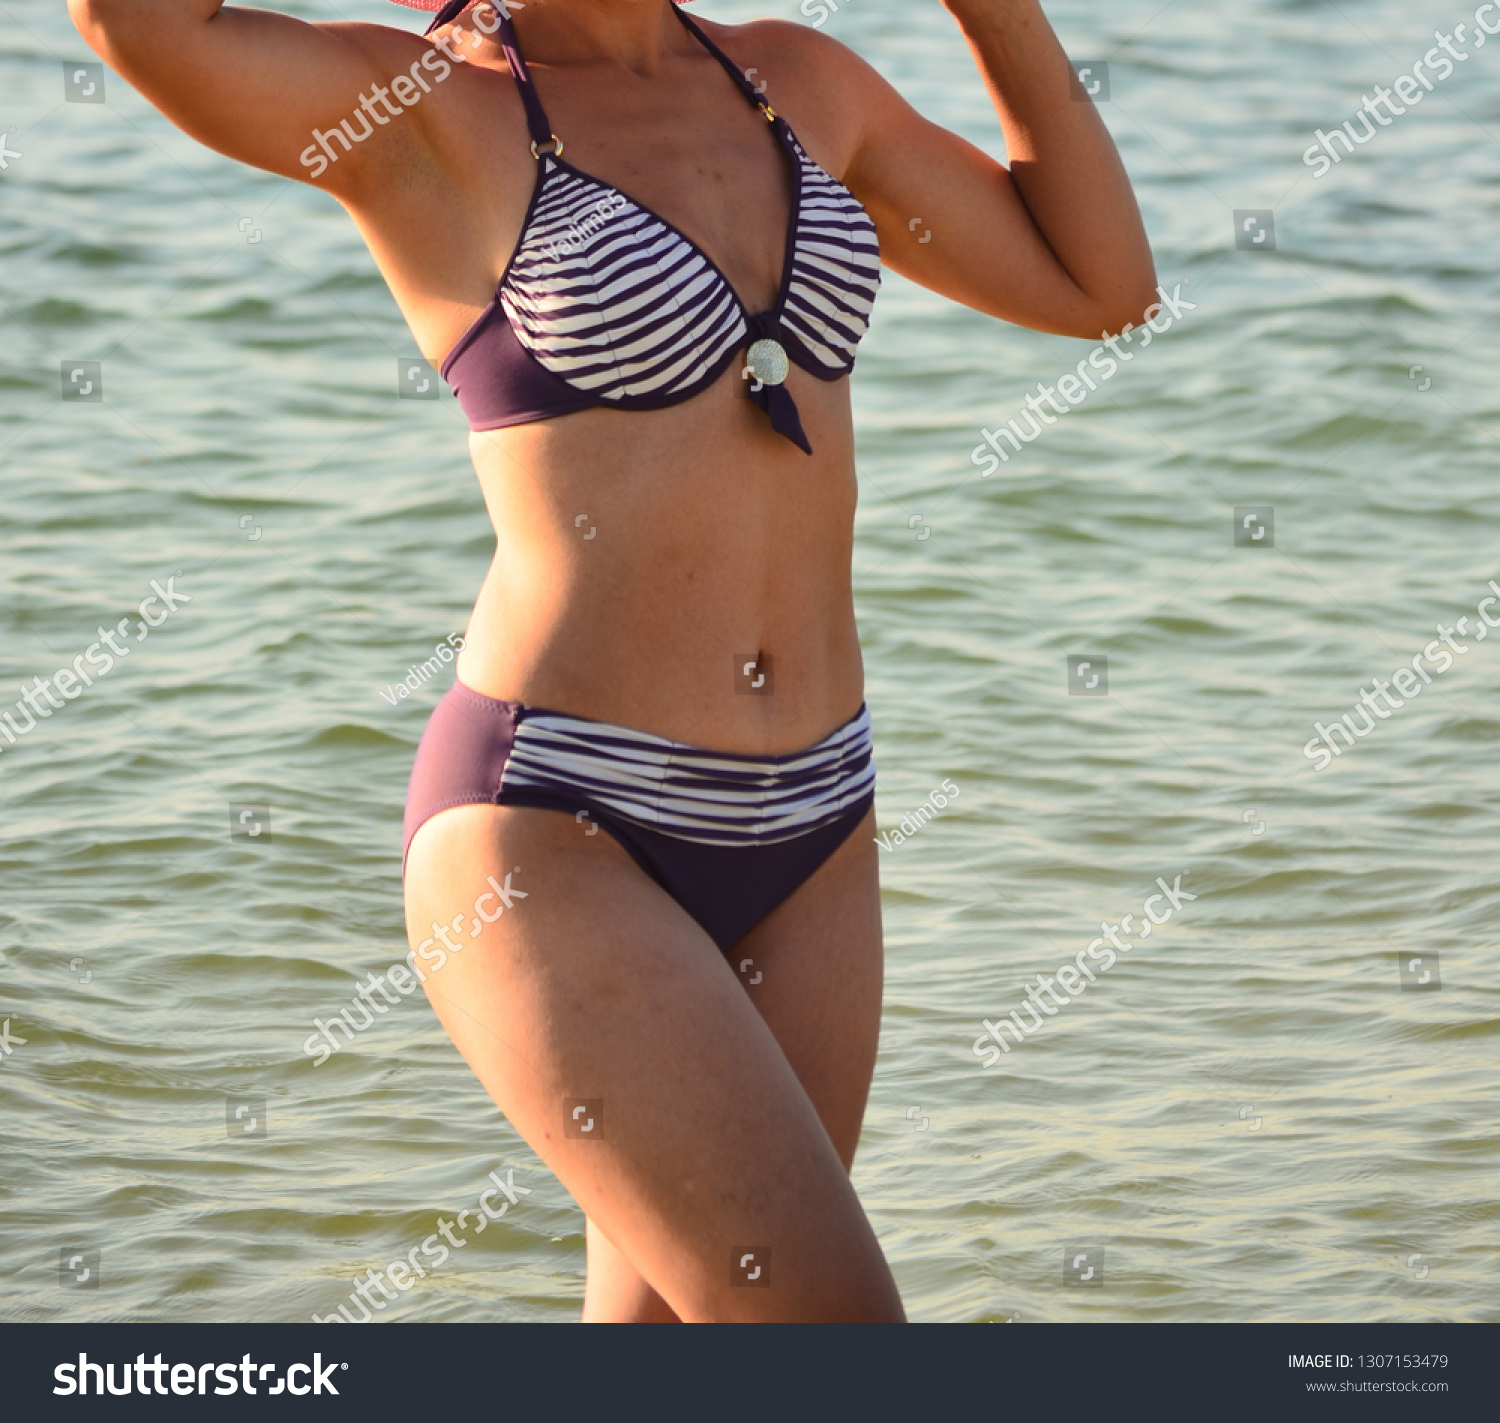 Woman on vacation posing for a photographer at the sea #1307153479